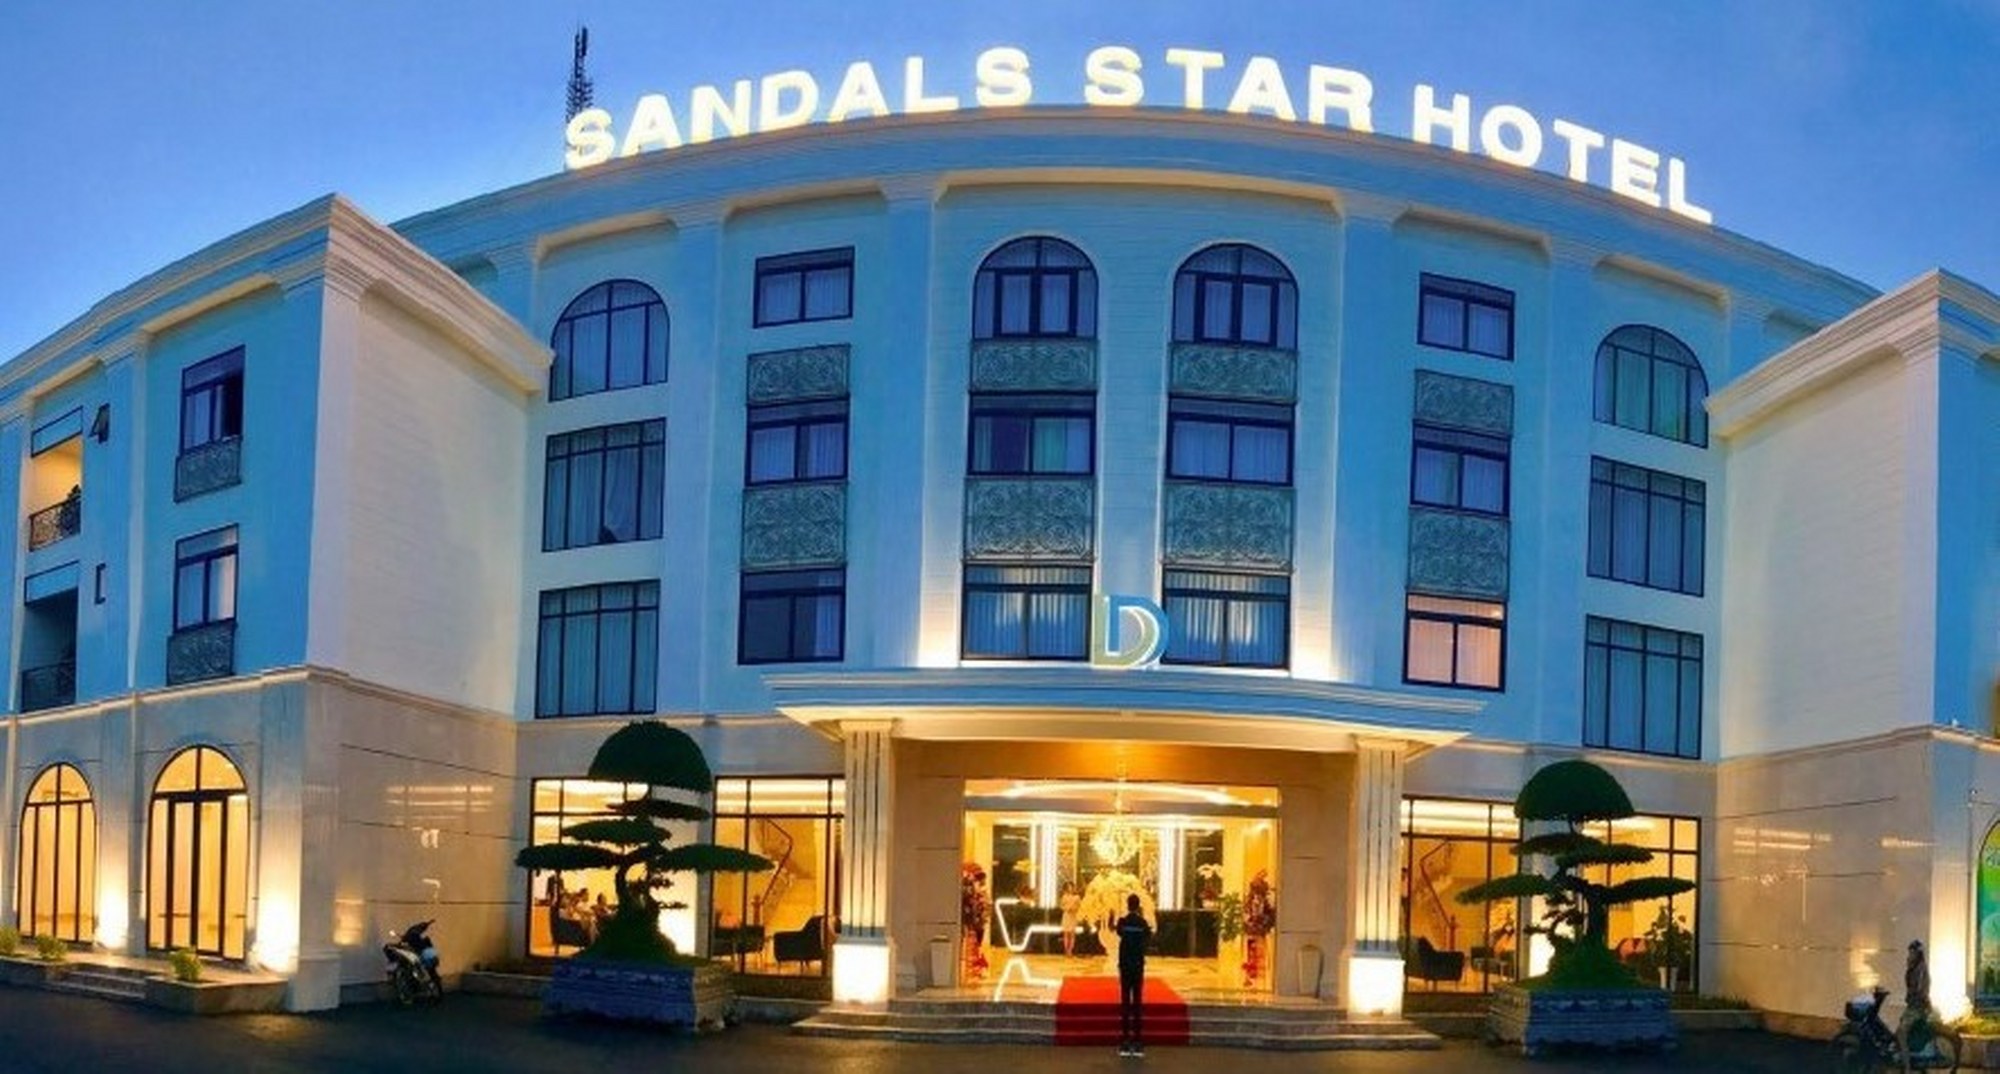 Exterior Sandals Star Hotel Duc Trong